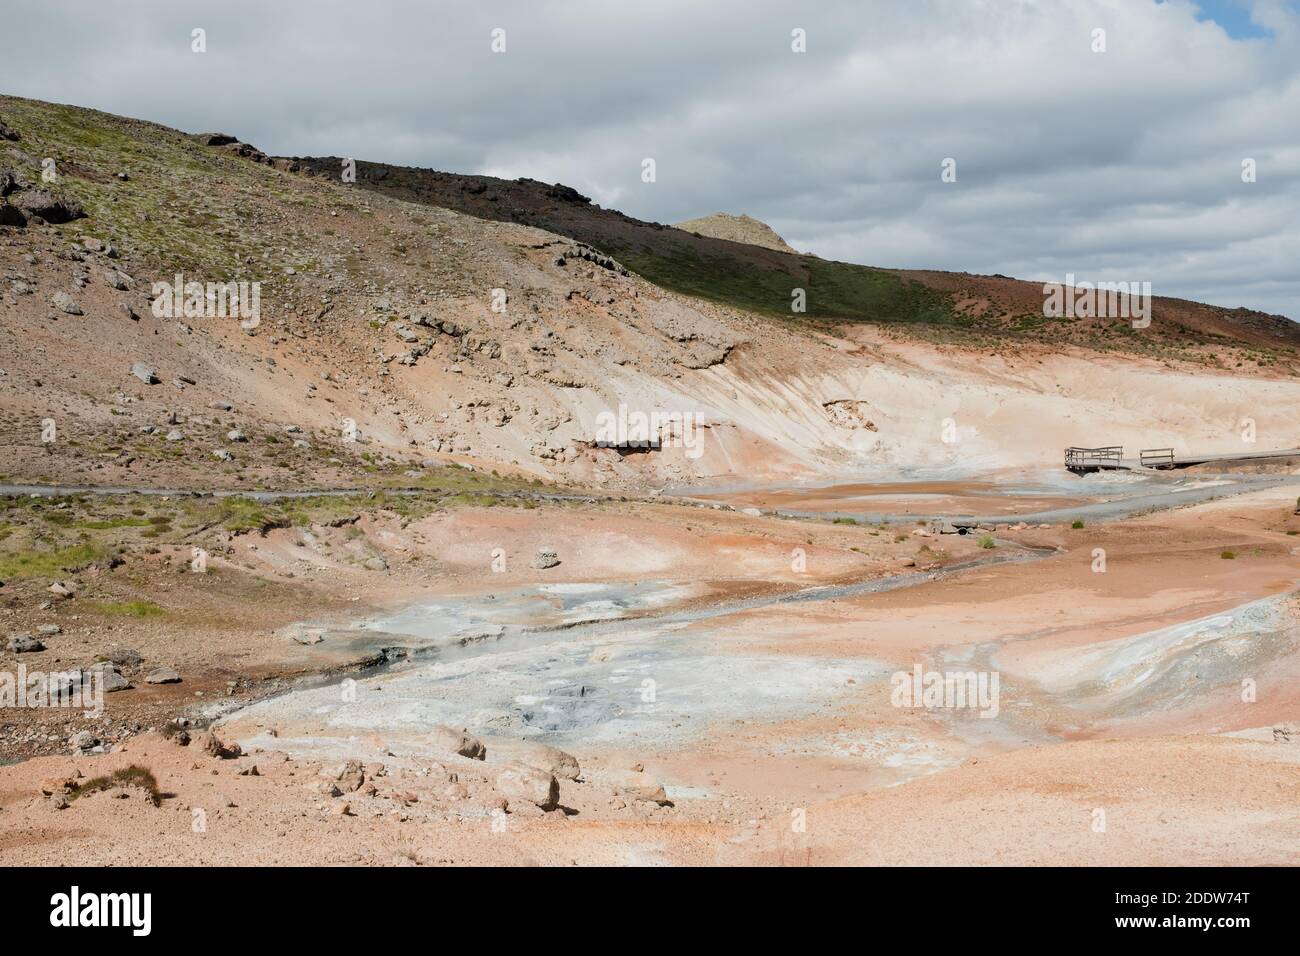 Krýsuvík is a geothermal area with steaming mud pools, streams and hot springs in the south west of Iceland. It is also a popular tourist attraction. Stock Photo